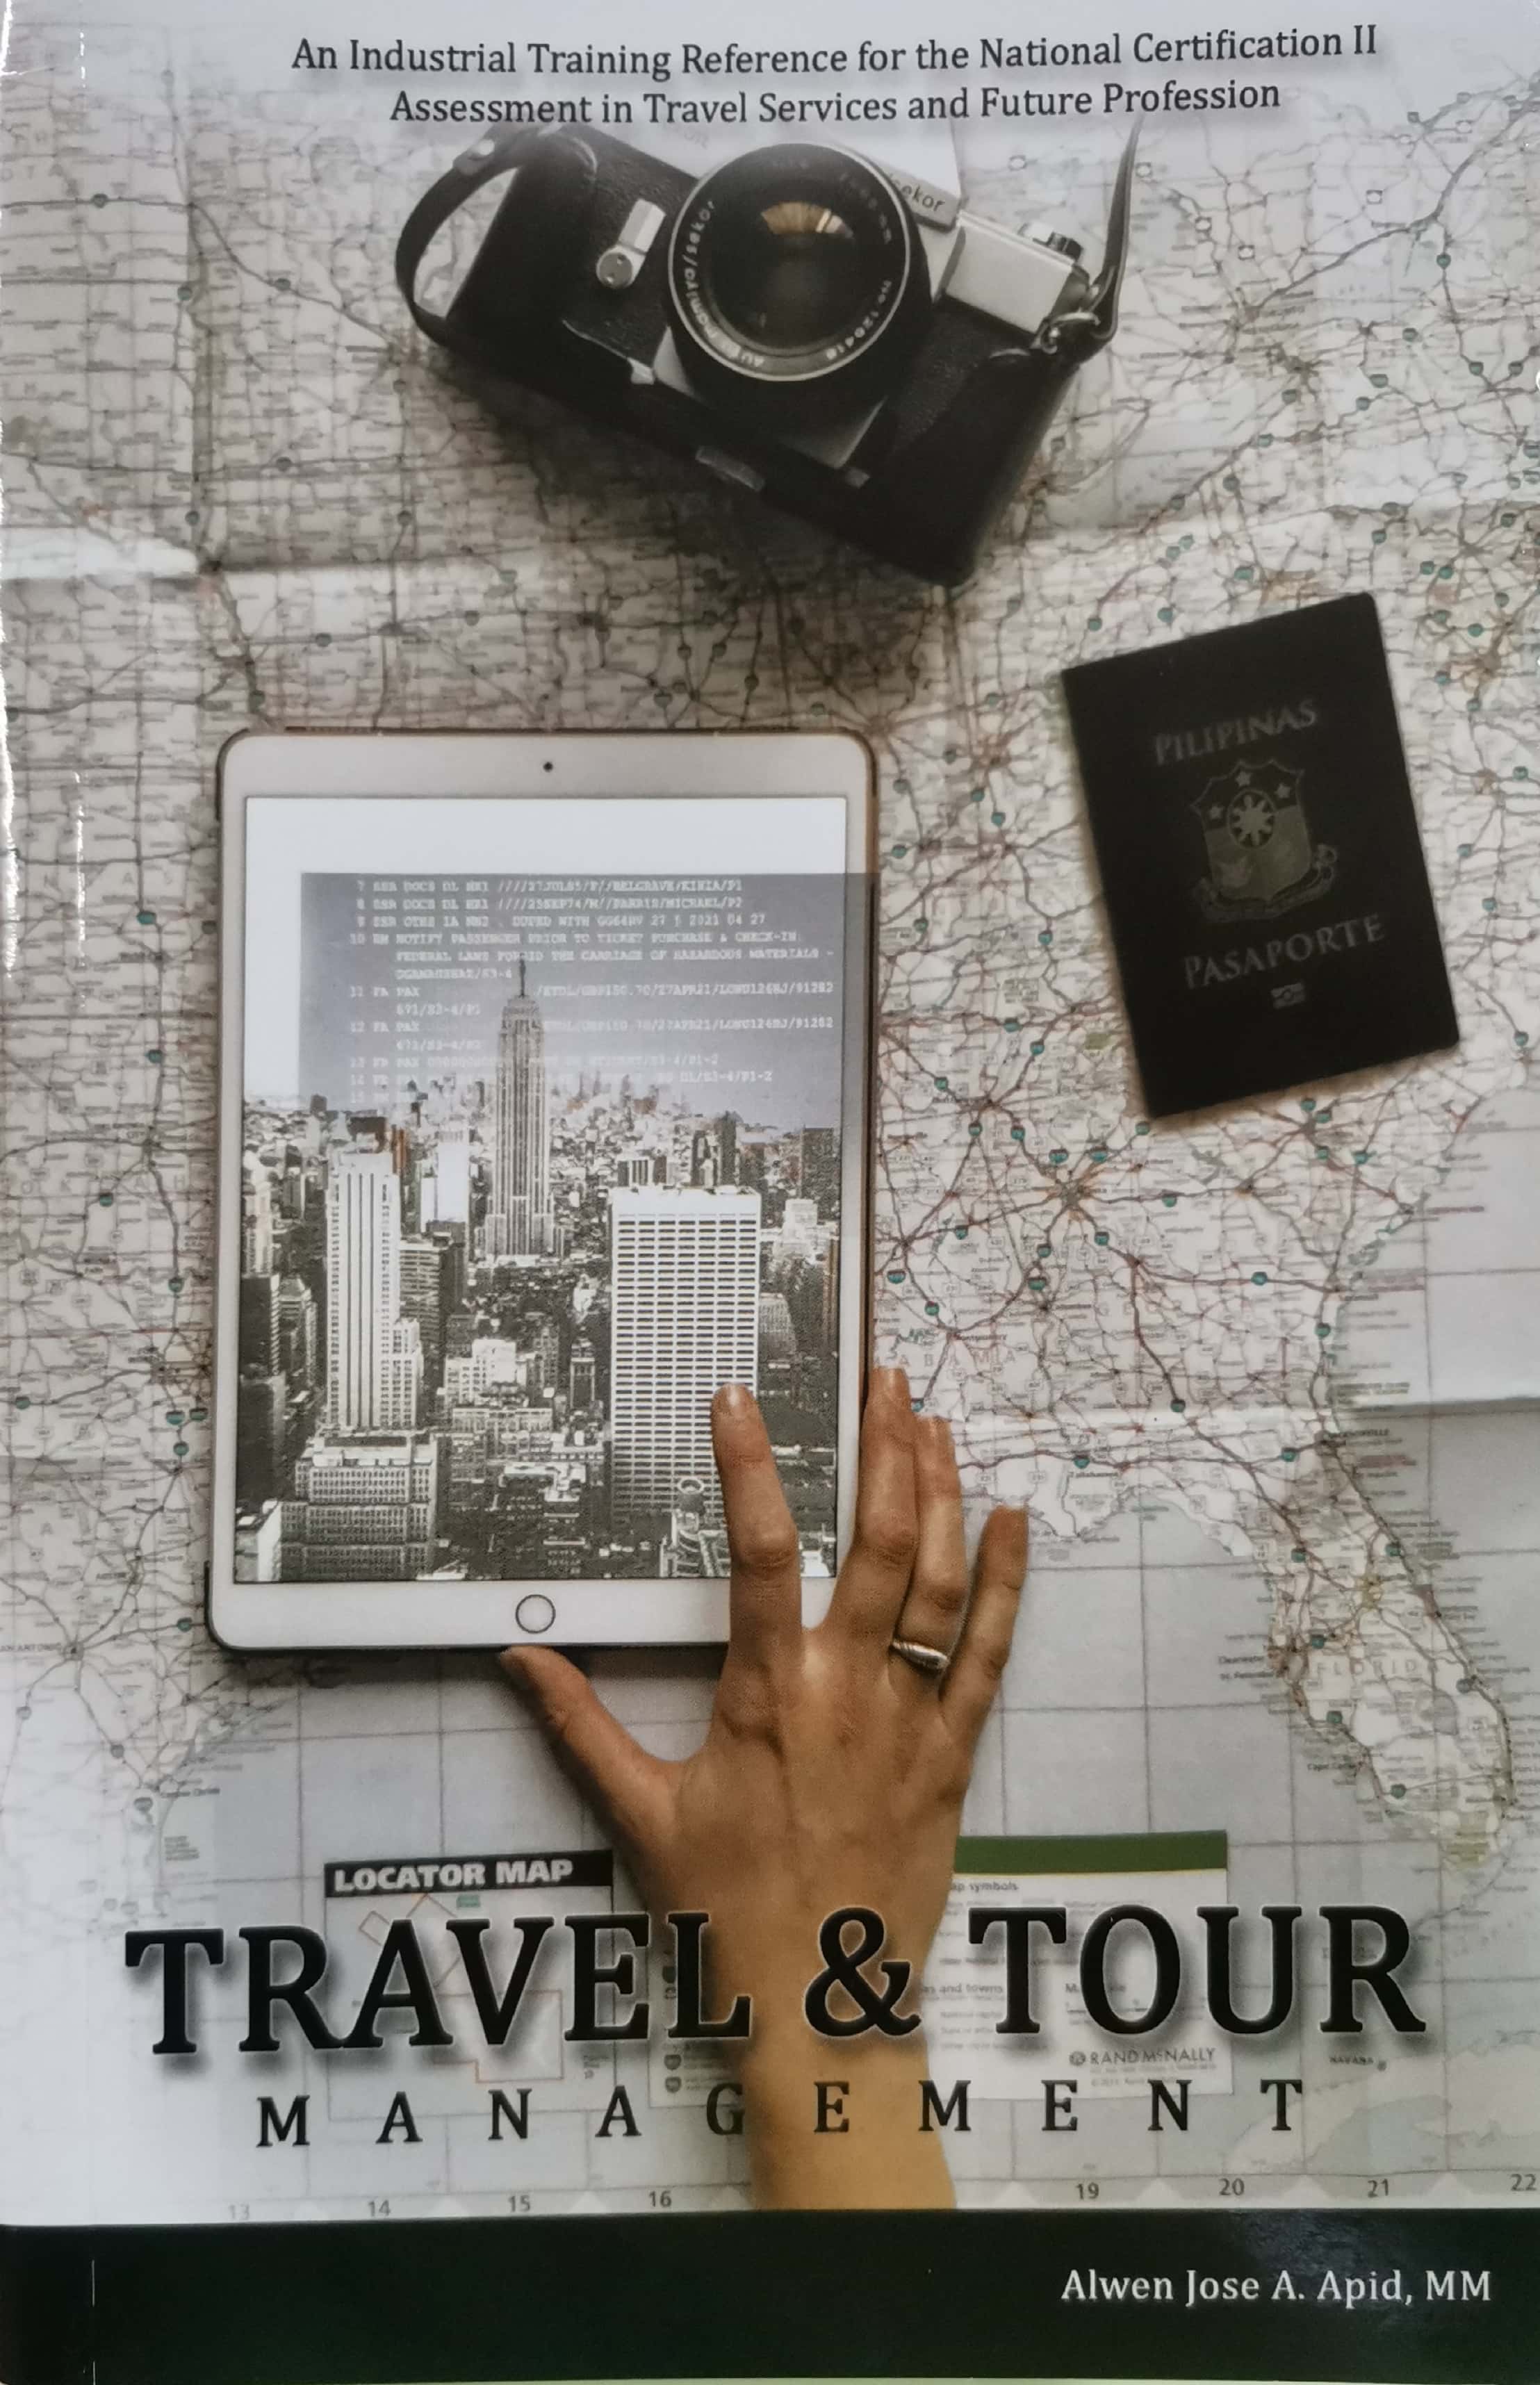 tour and travel management course